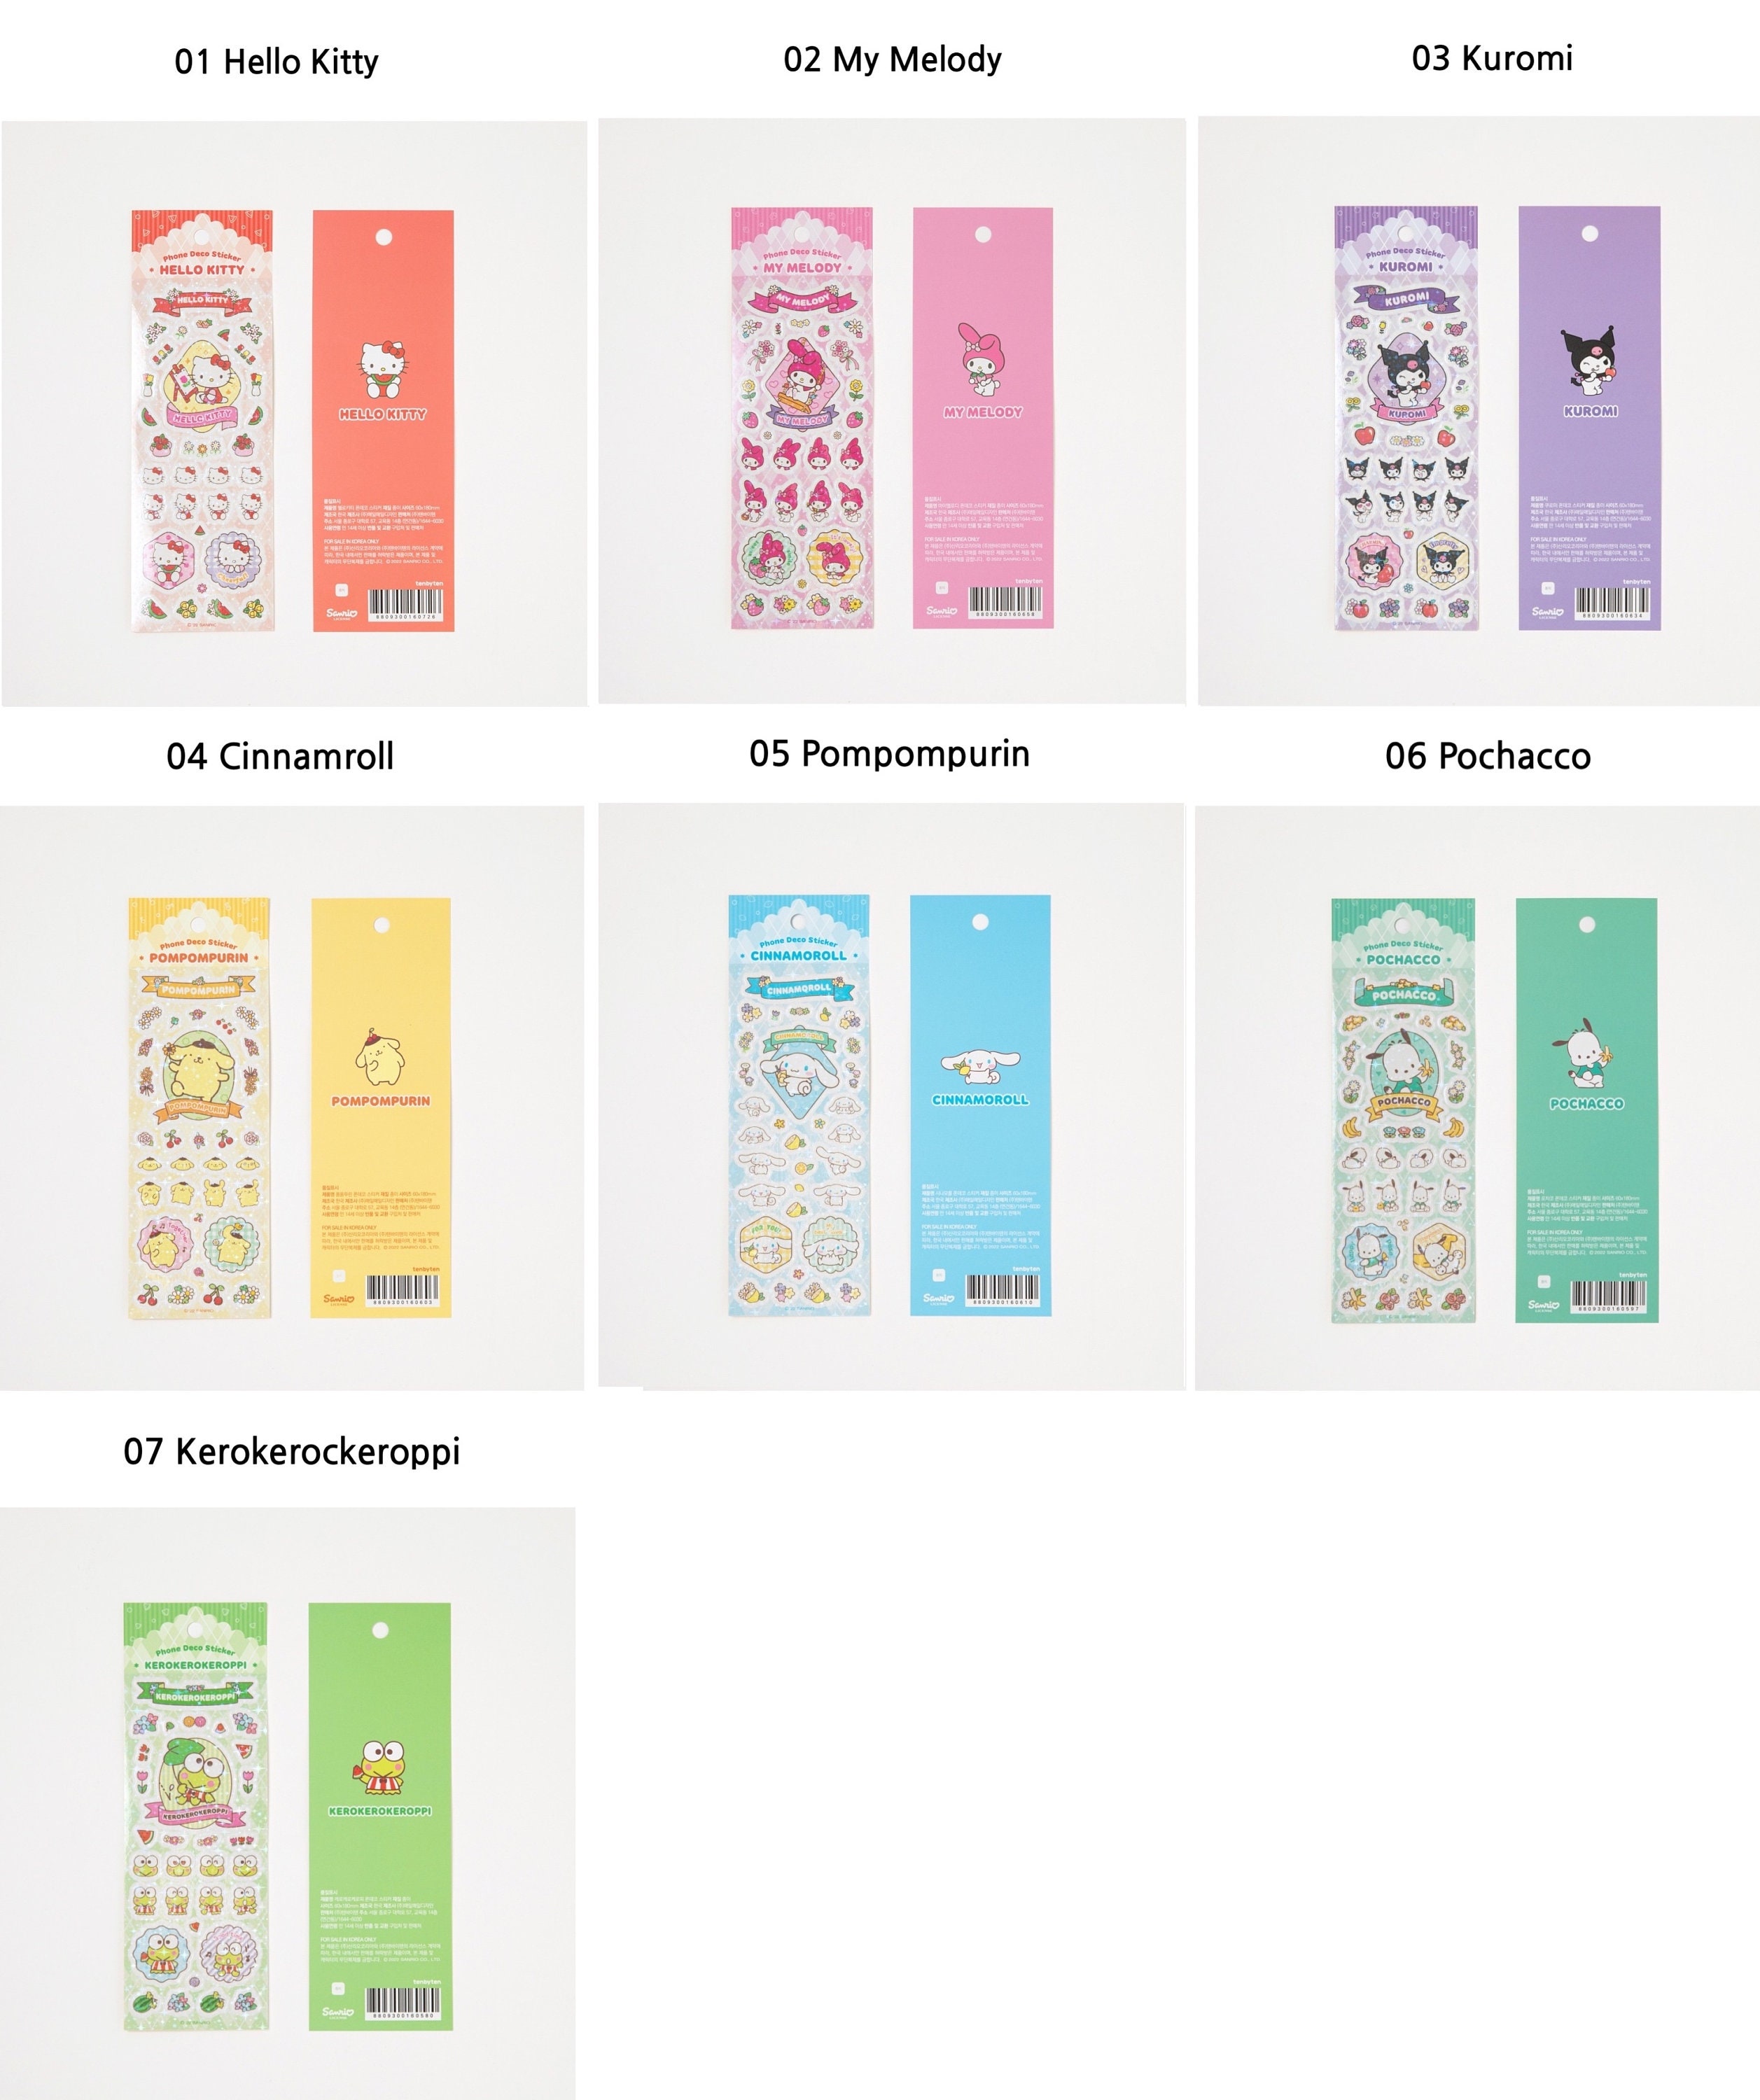 Tin Case Sanrio Sticker Pack 6types / Removable Stickers / Laptop, Planner,  Diary, Journal Stickers, Decorative Scrapbooking 